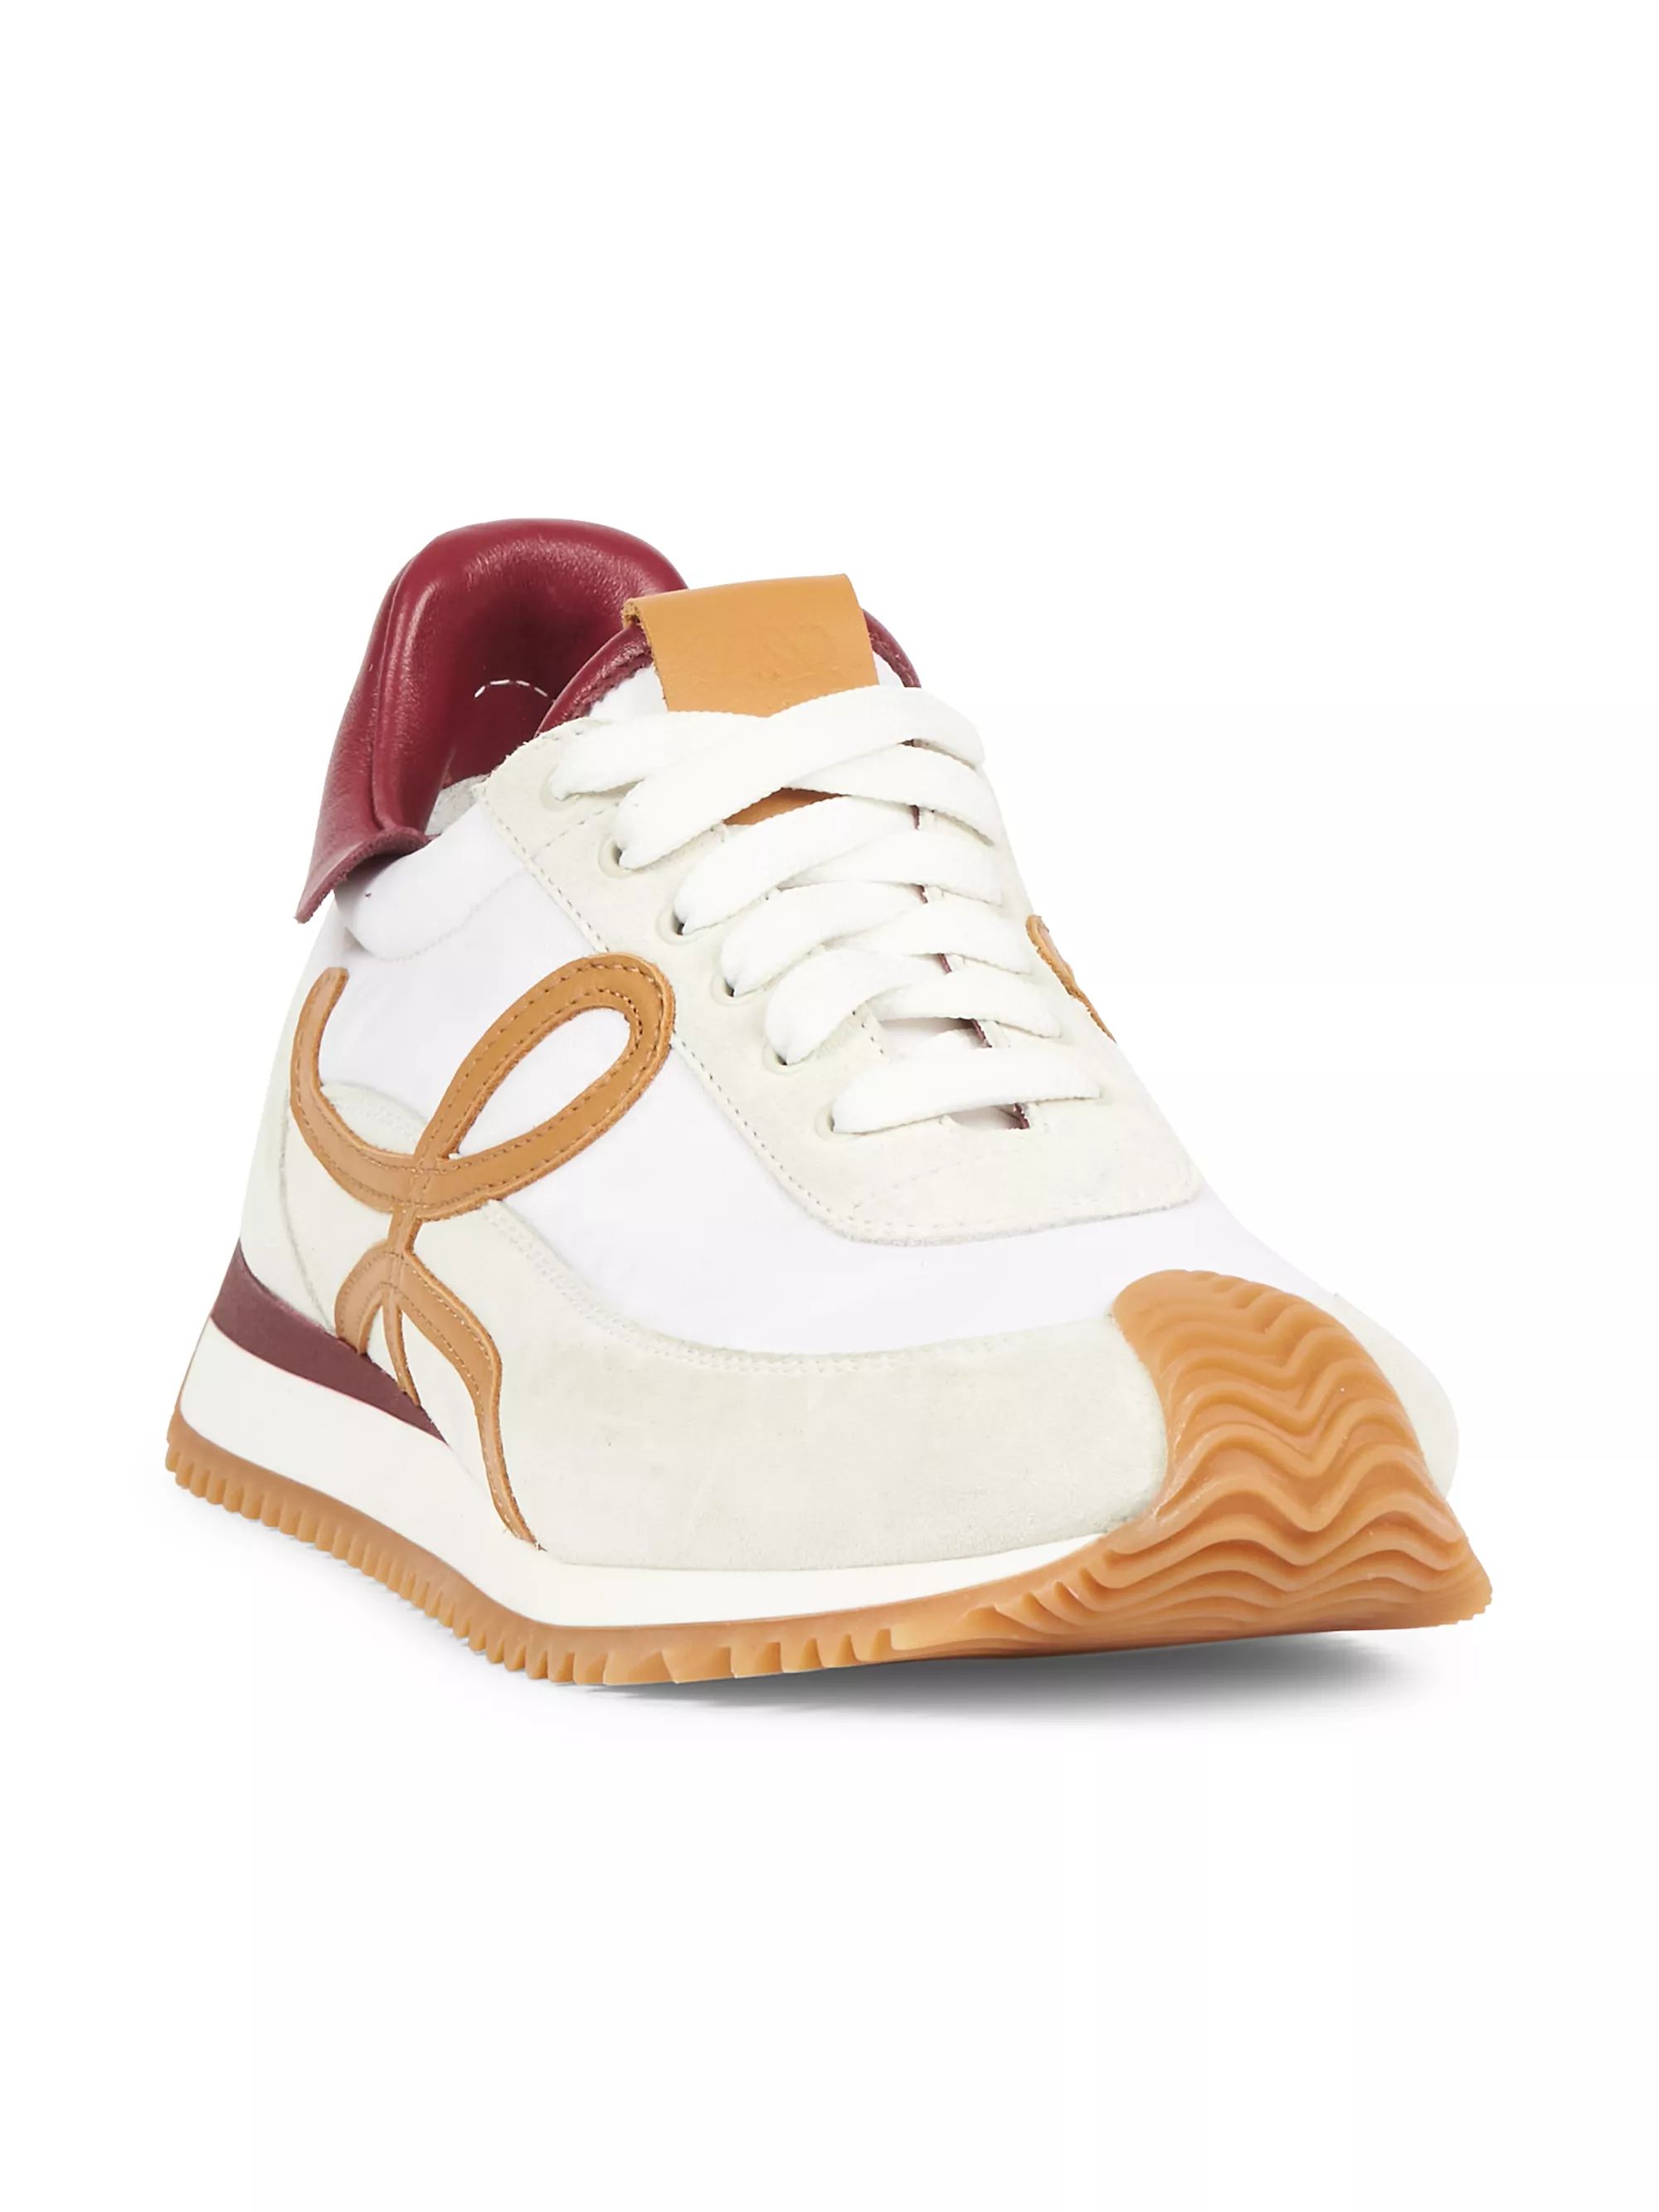 Shop By CategorySneakersLOEWEFlow Runner Mix Leather SneakersRating: 5 out of 5 stars1$790 | Saks Fifth Avenue